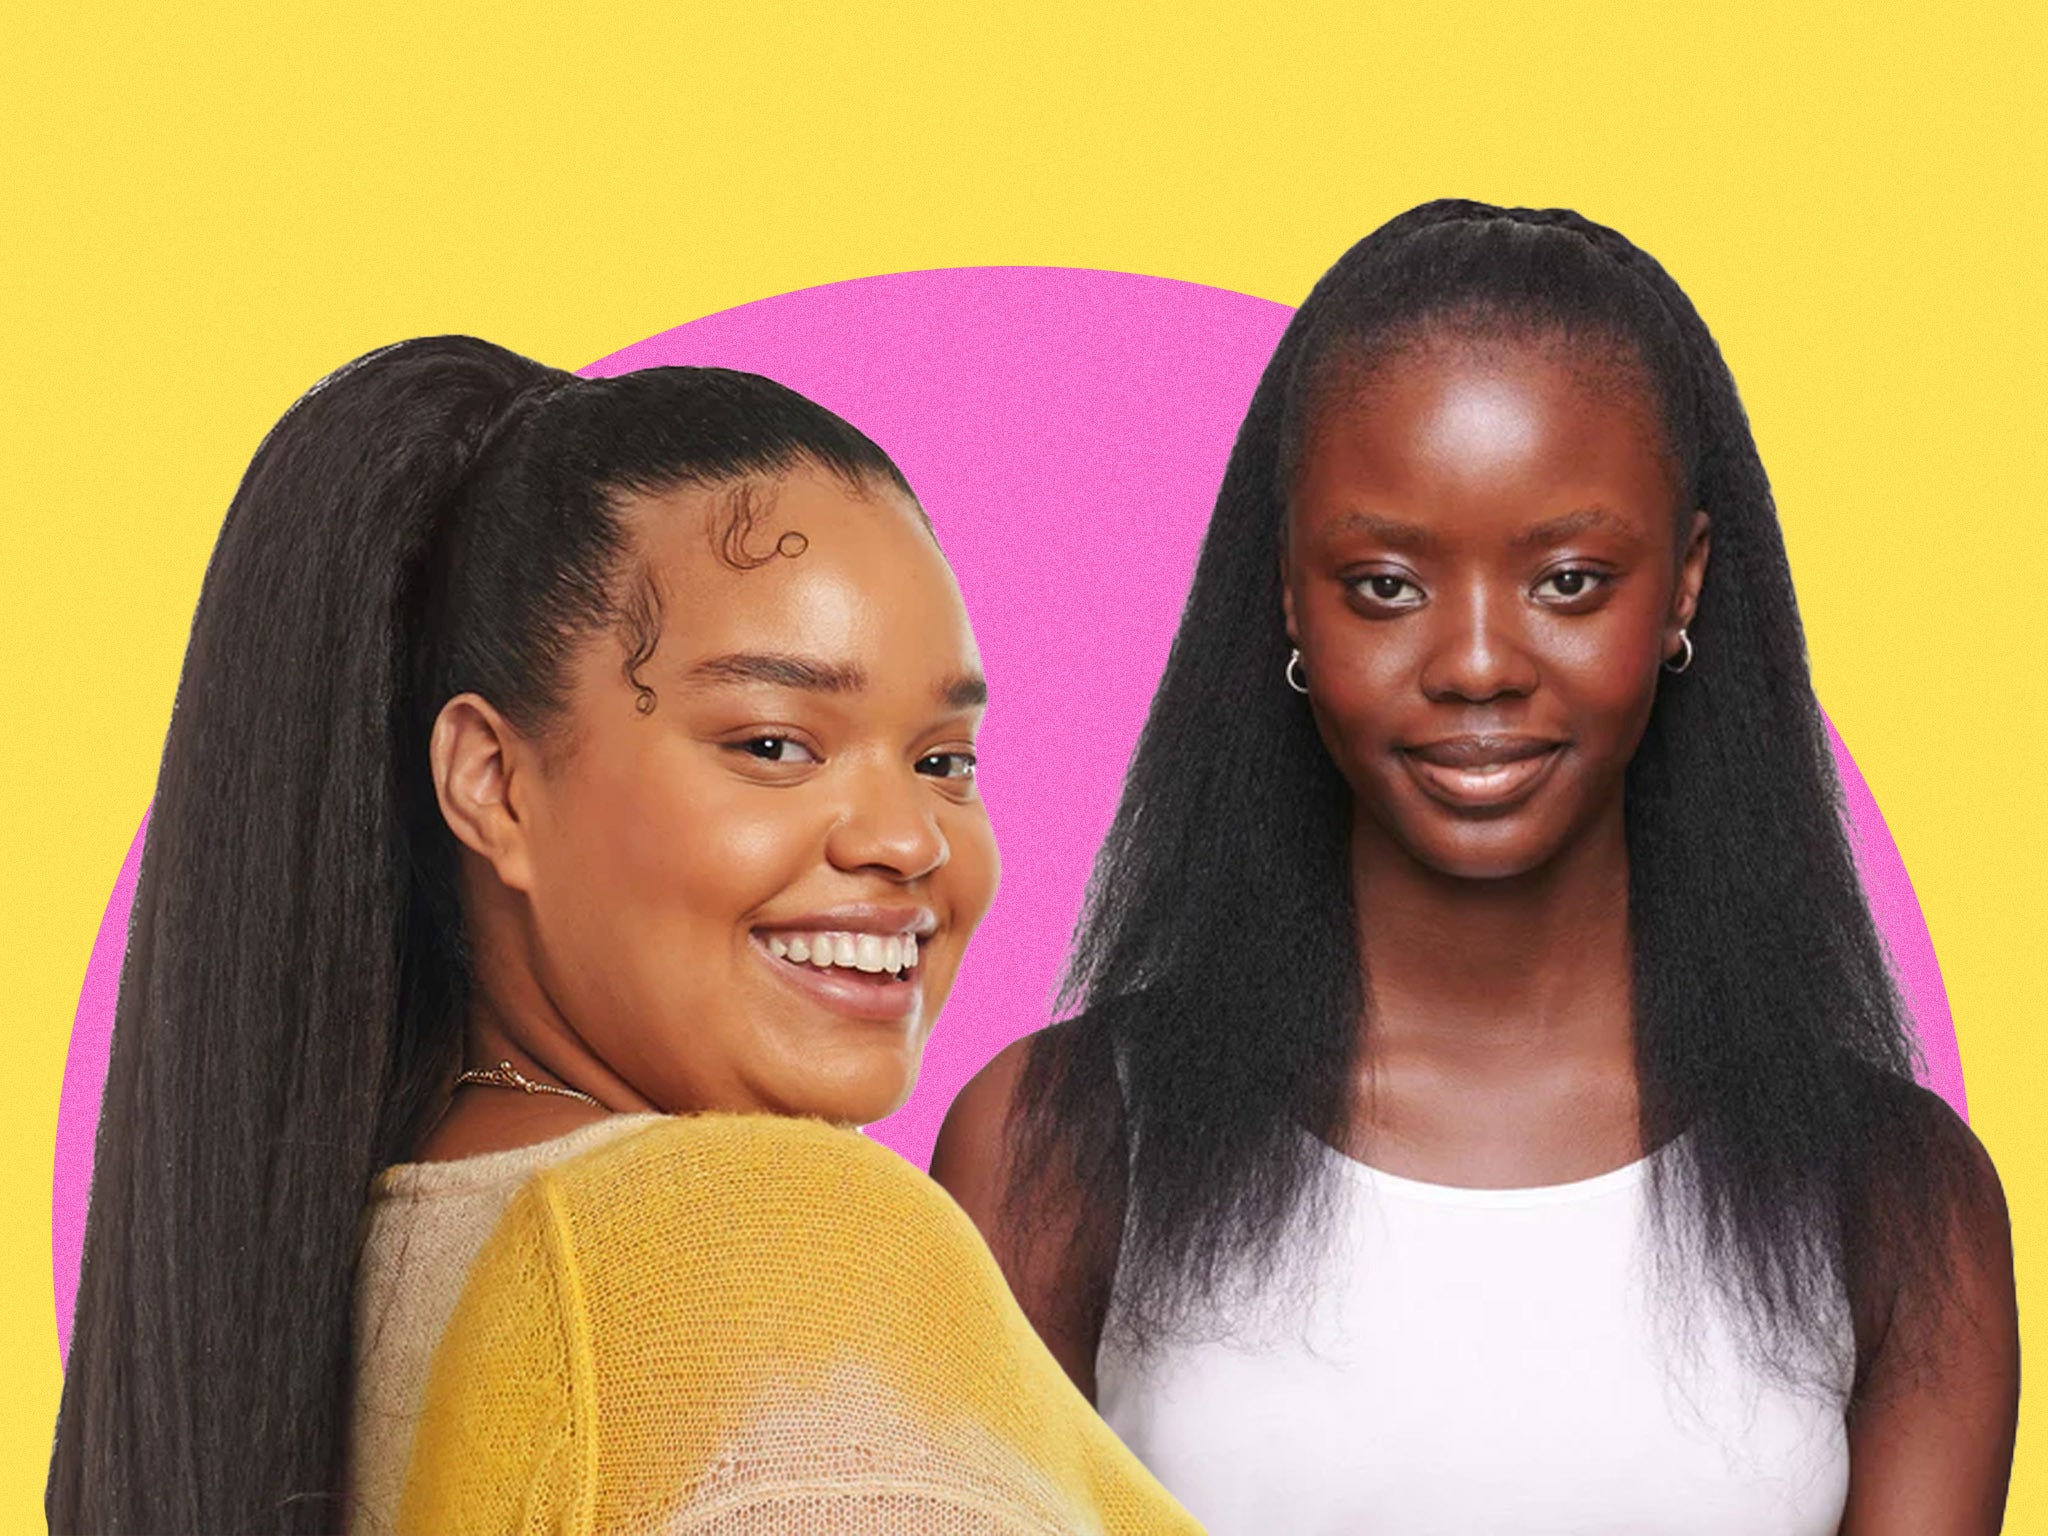 We whipped our hair back and forth, in true Willow Smith fashion, to test the security of each ponytail